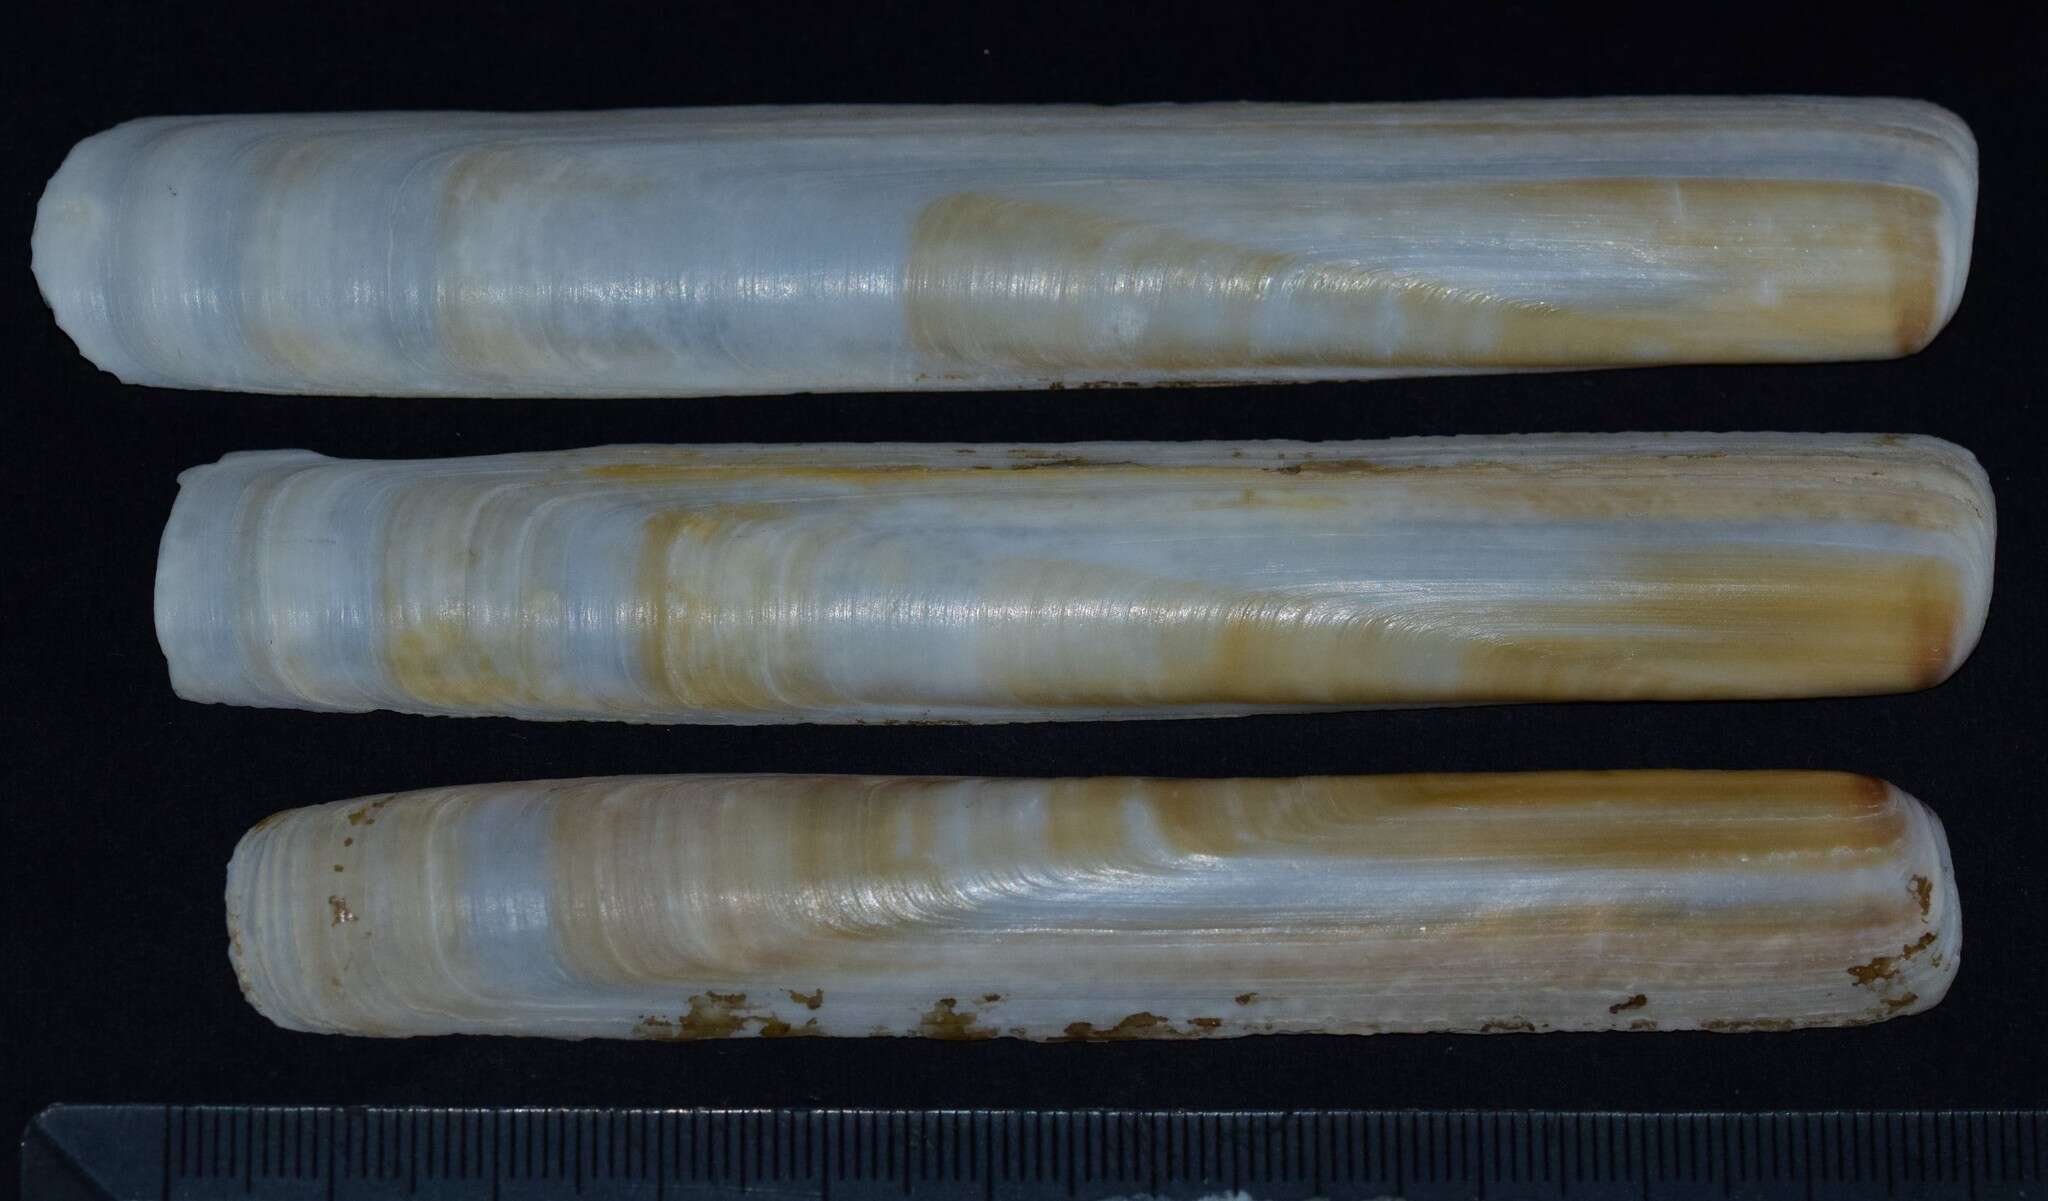 Image of Grooved Razor Shell